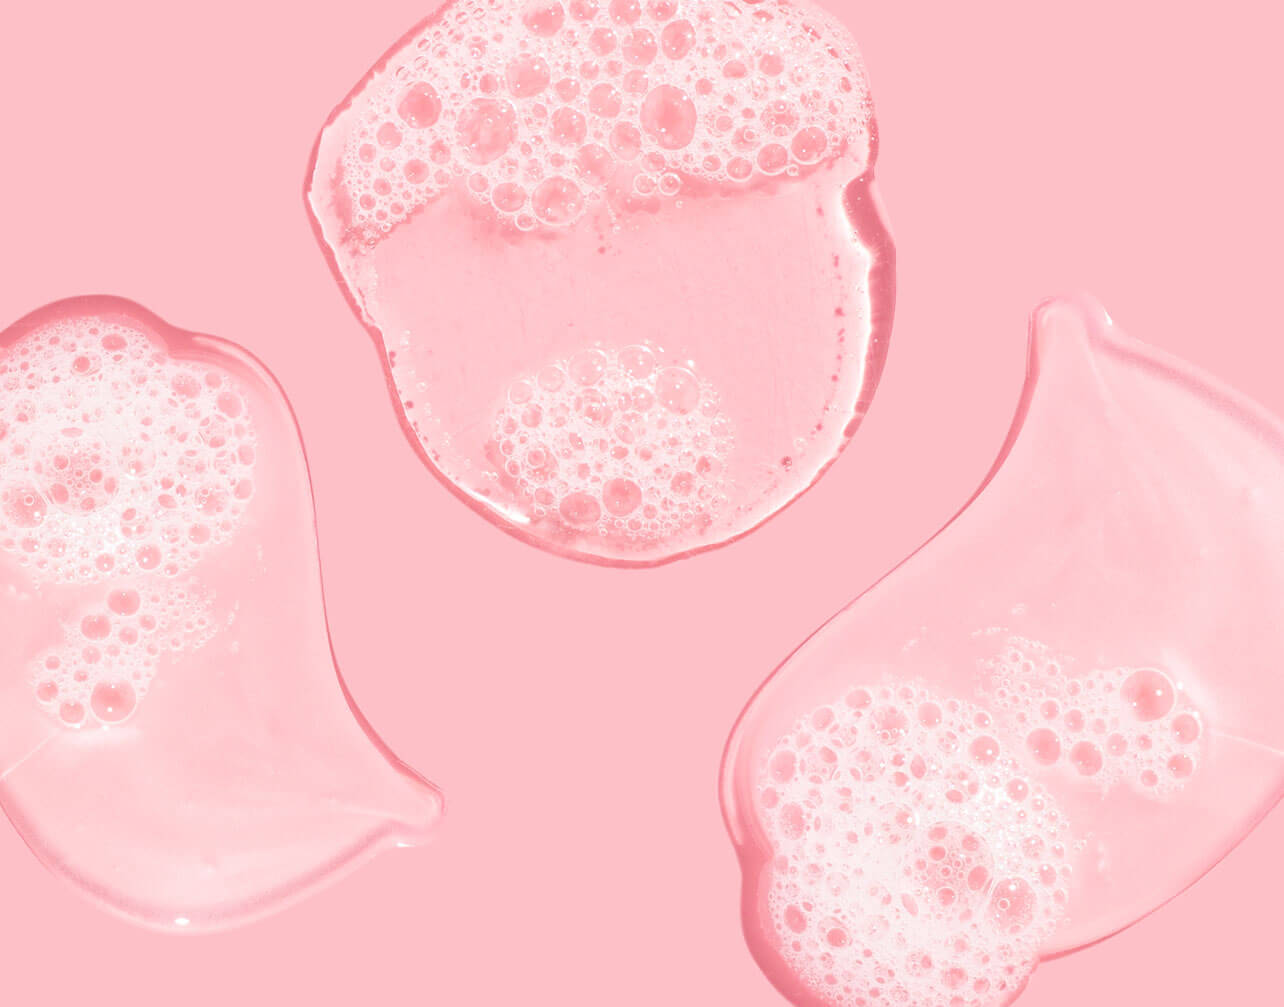 hair gel with bubbles on pink background